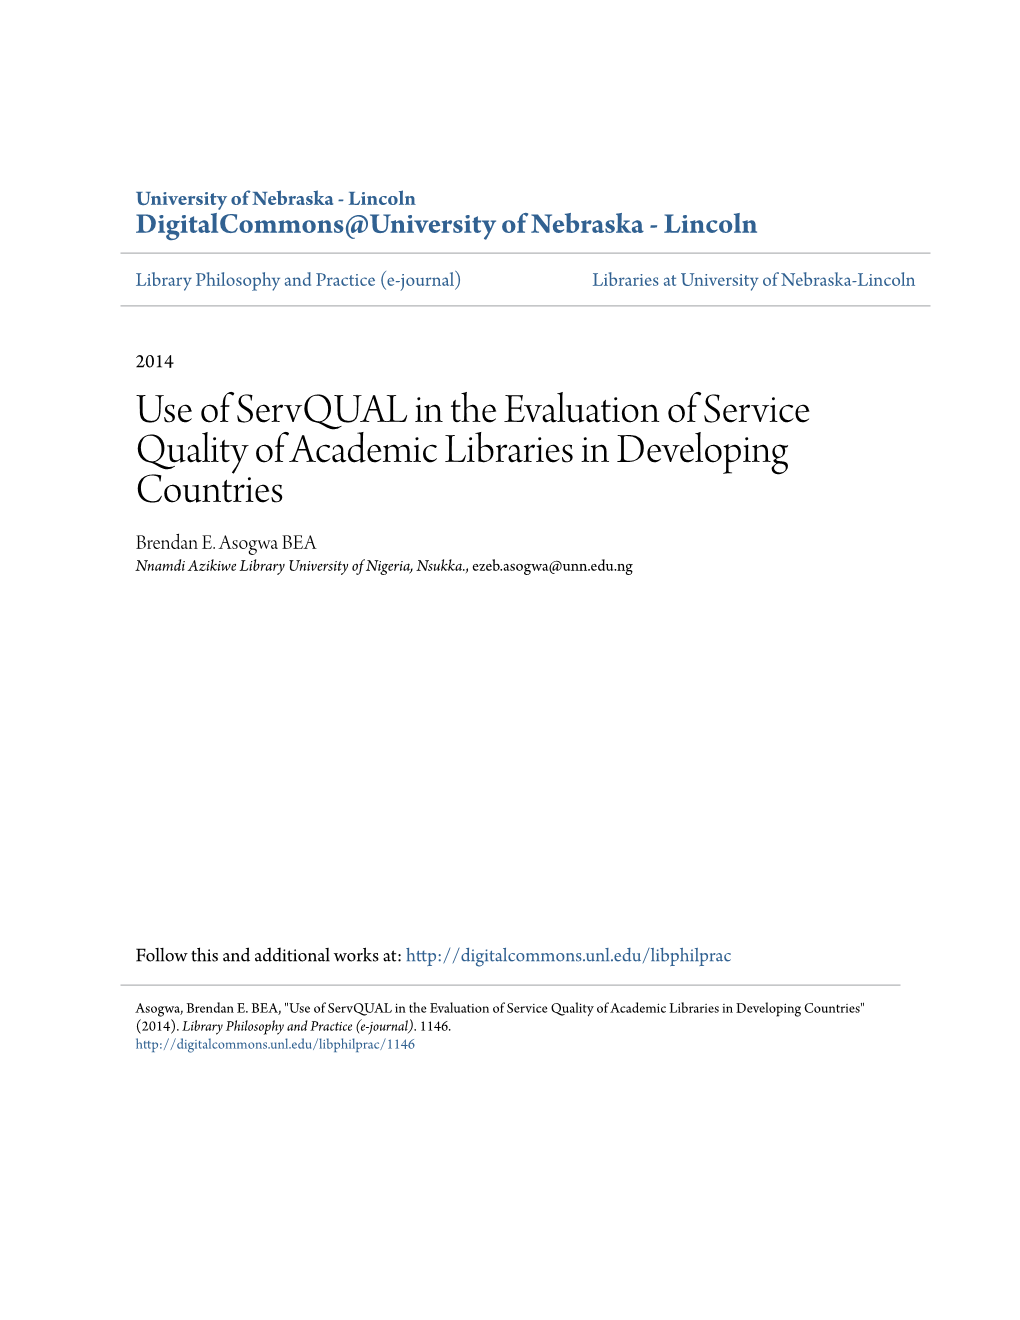 Use of Servqual in the Evaluation of Service Quality of Academic Libraries in Developing Countries Brendan E